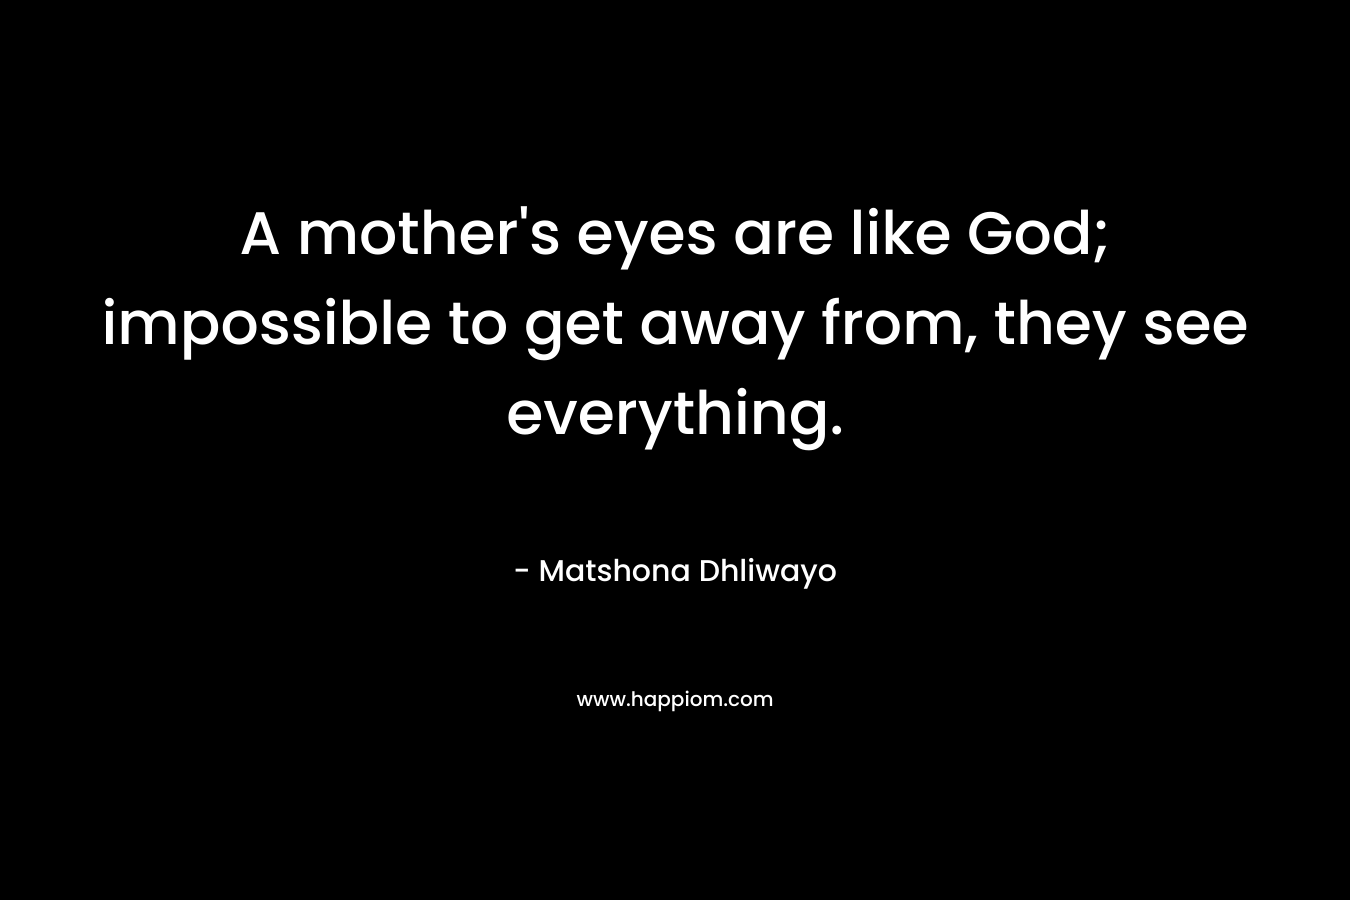 A mother's eyes are like God; impossible to get away from, they see everything.